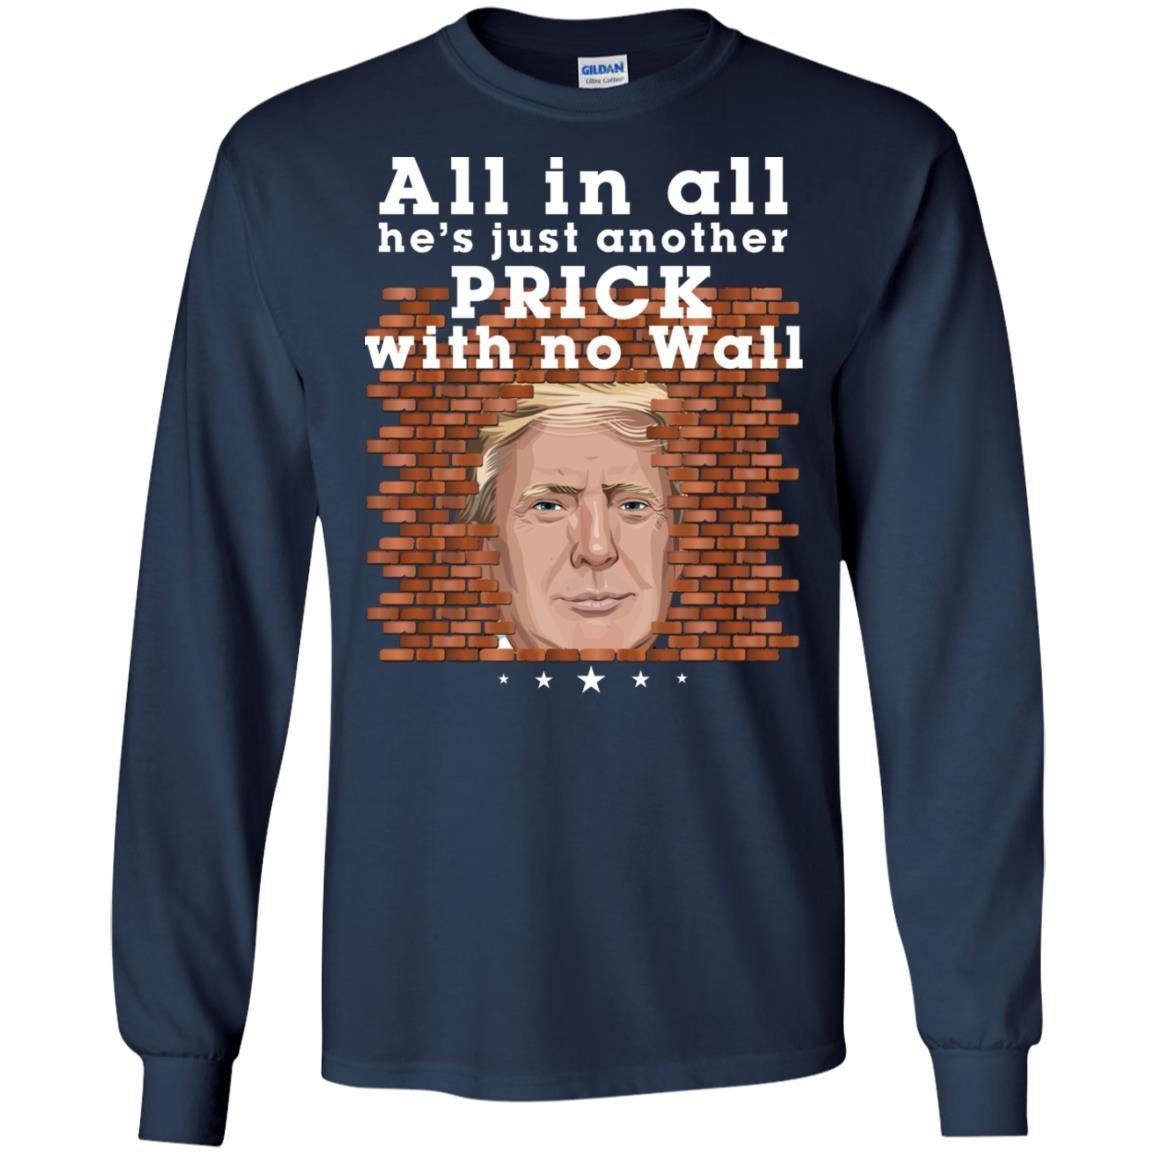 All In All He’s Just Another Prick With No Wall Trump shirt